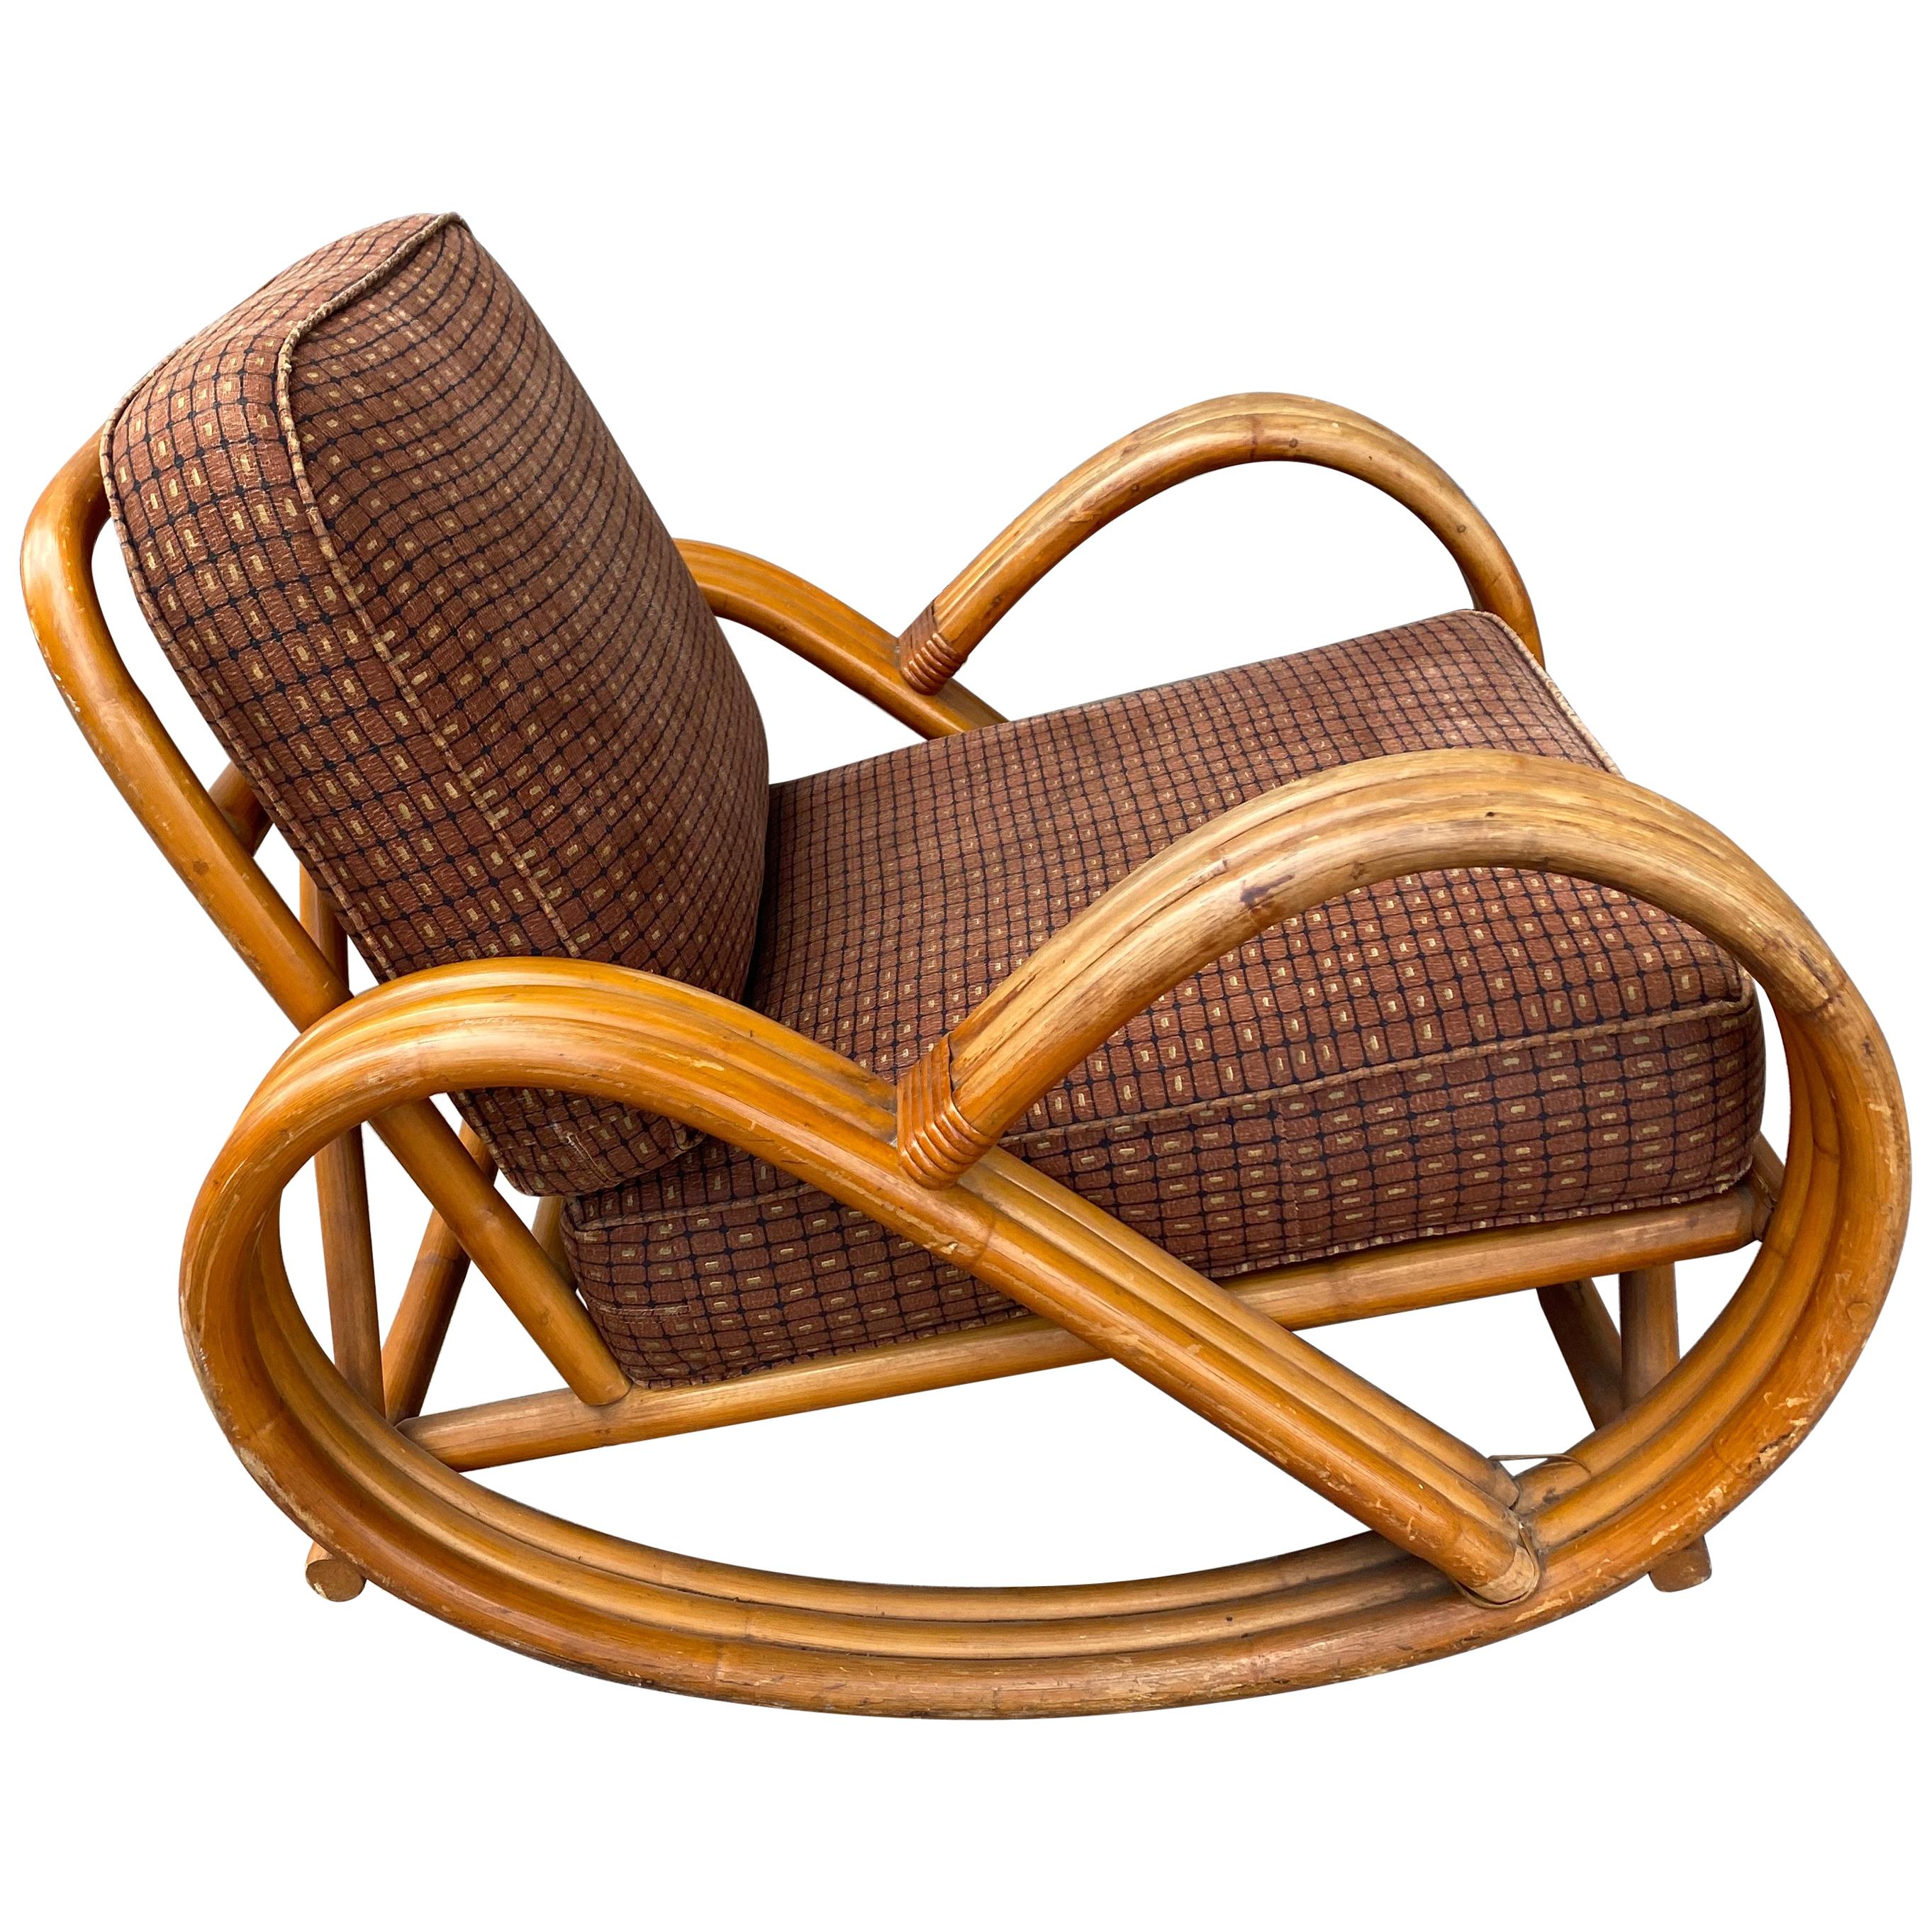 Paul Frankl Style Bamboo "pretzel" Rocking Lounge Chair, c.1940's